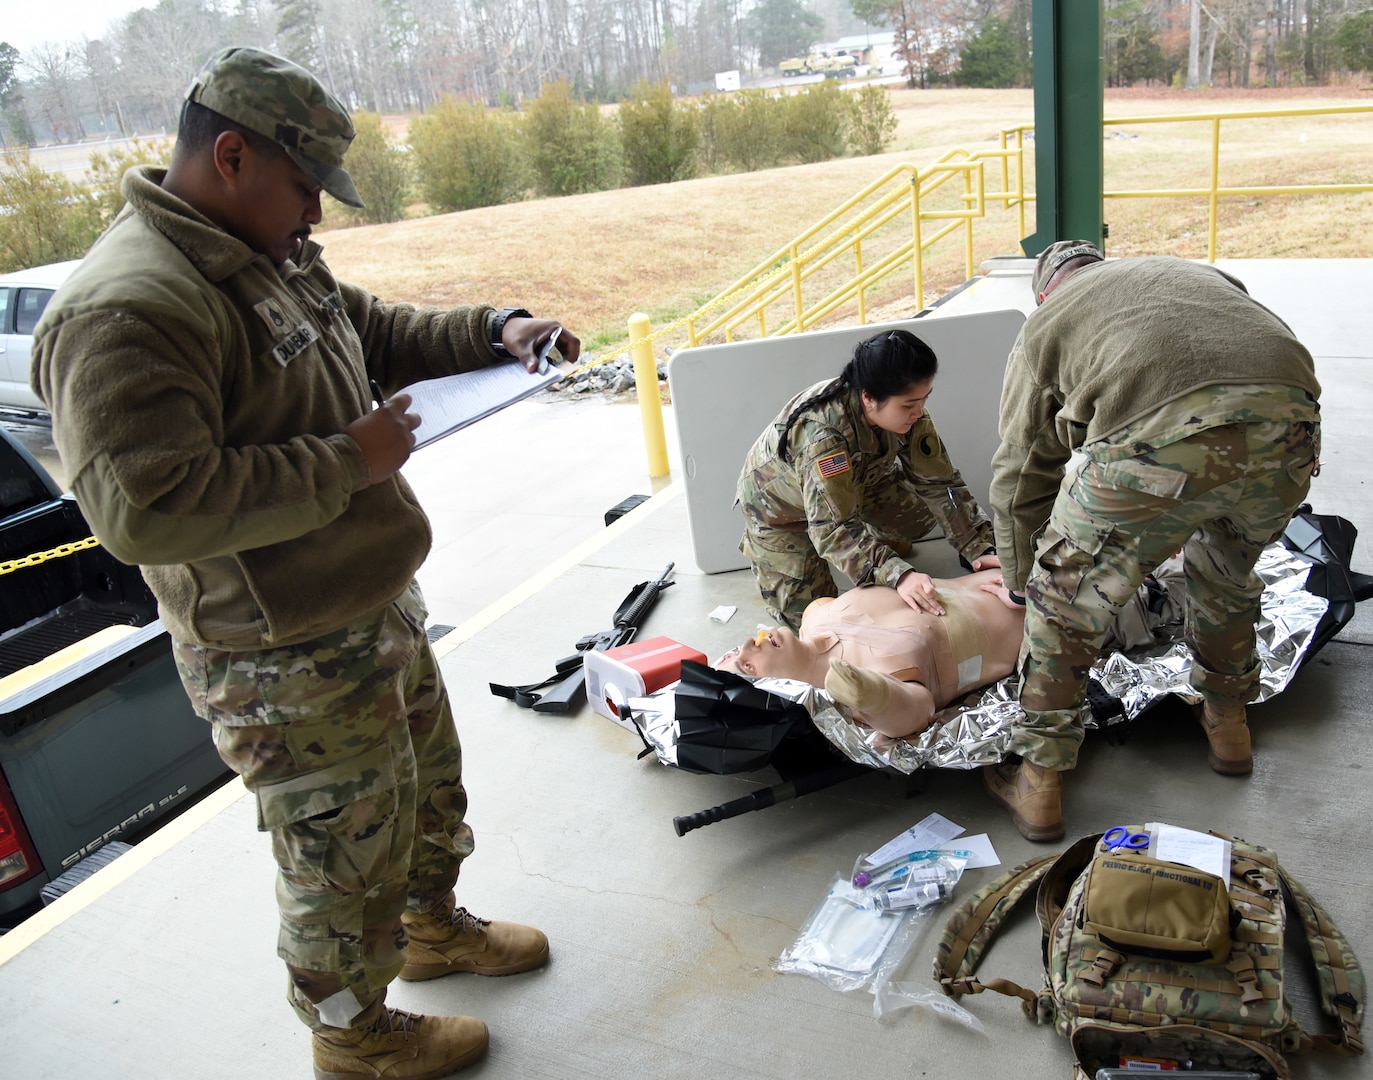 Virginia National Guard Soldiers conduct combat medic certification during refresher training Jan. 25, 2023, at Fort Pickett, Virginia. More than 30 VNG medics completed classroom and practical training, including two medical and two trauma scenarios.